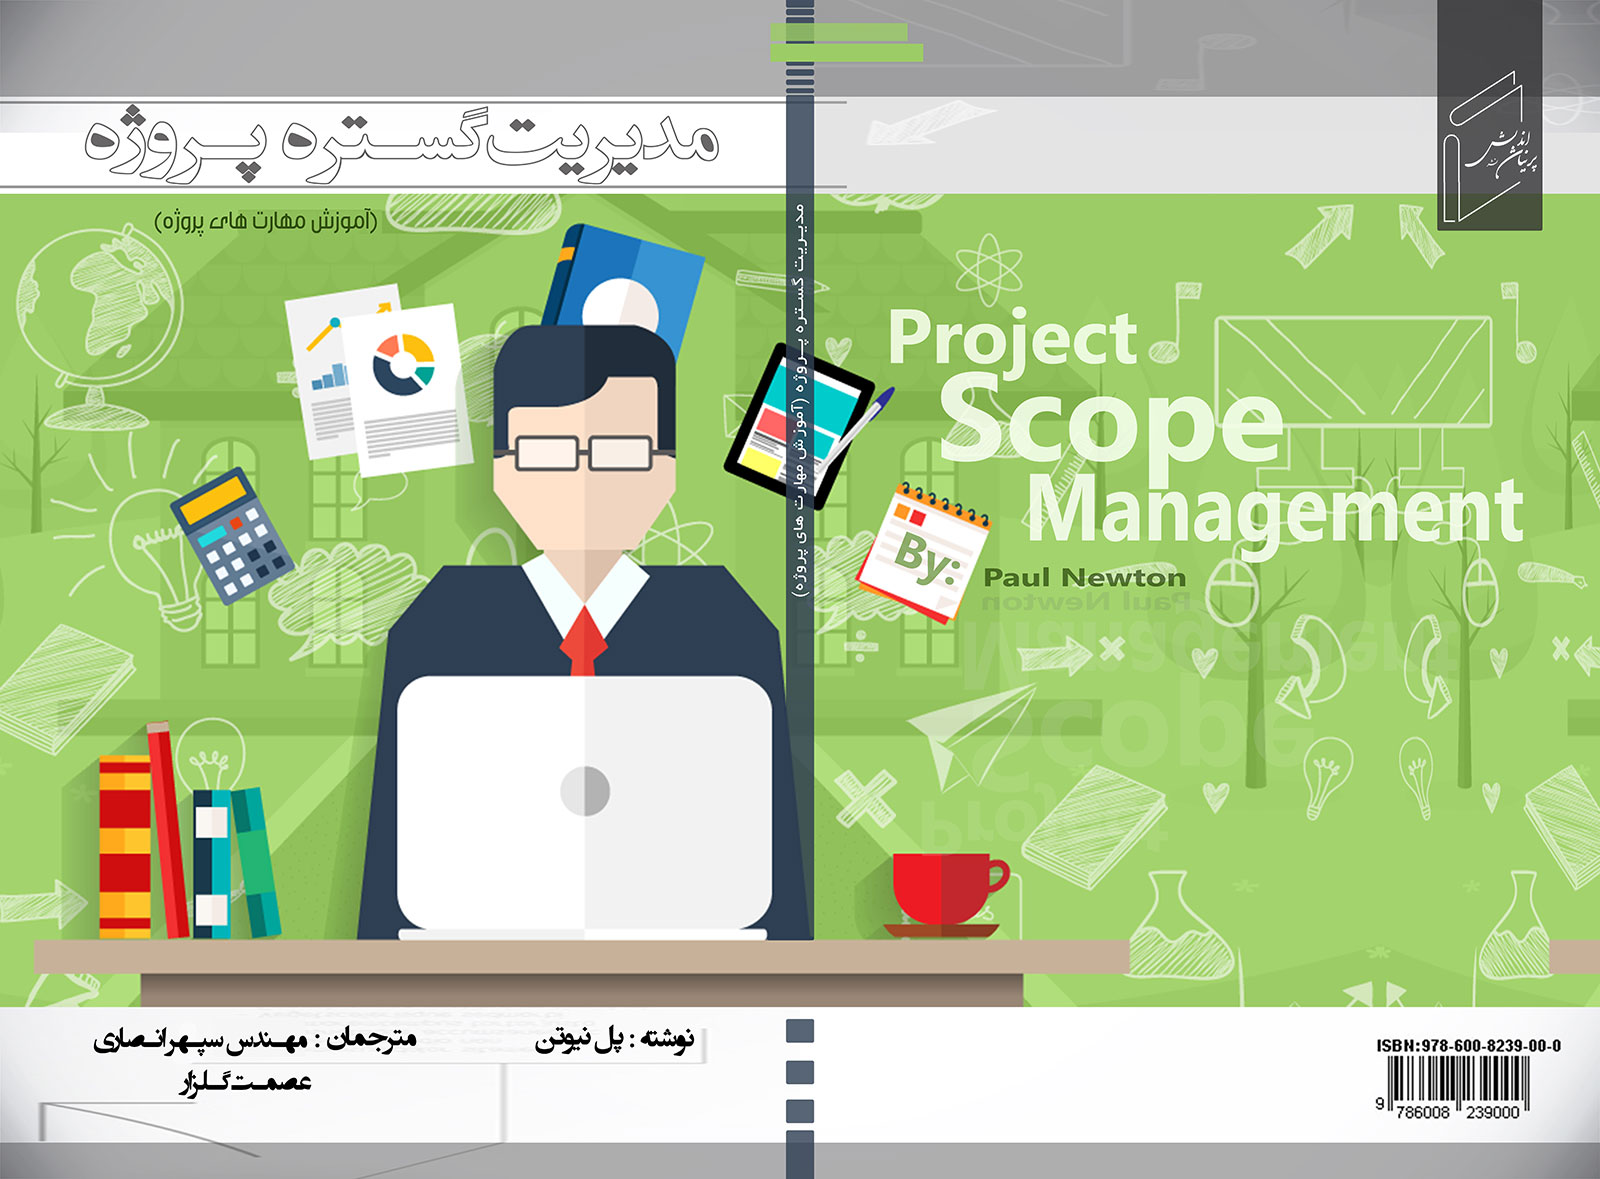 Project scope management (project skills training)